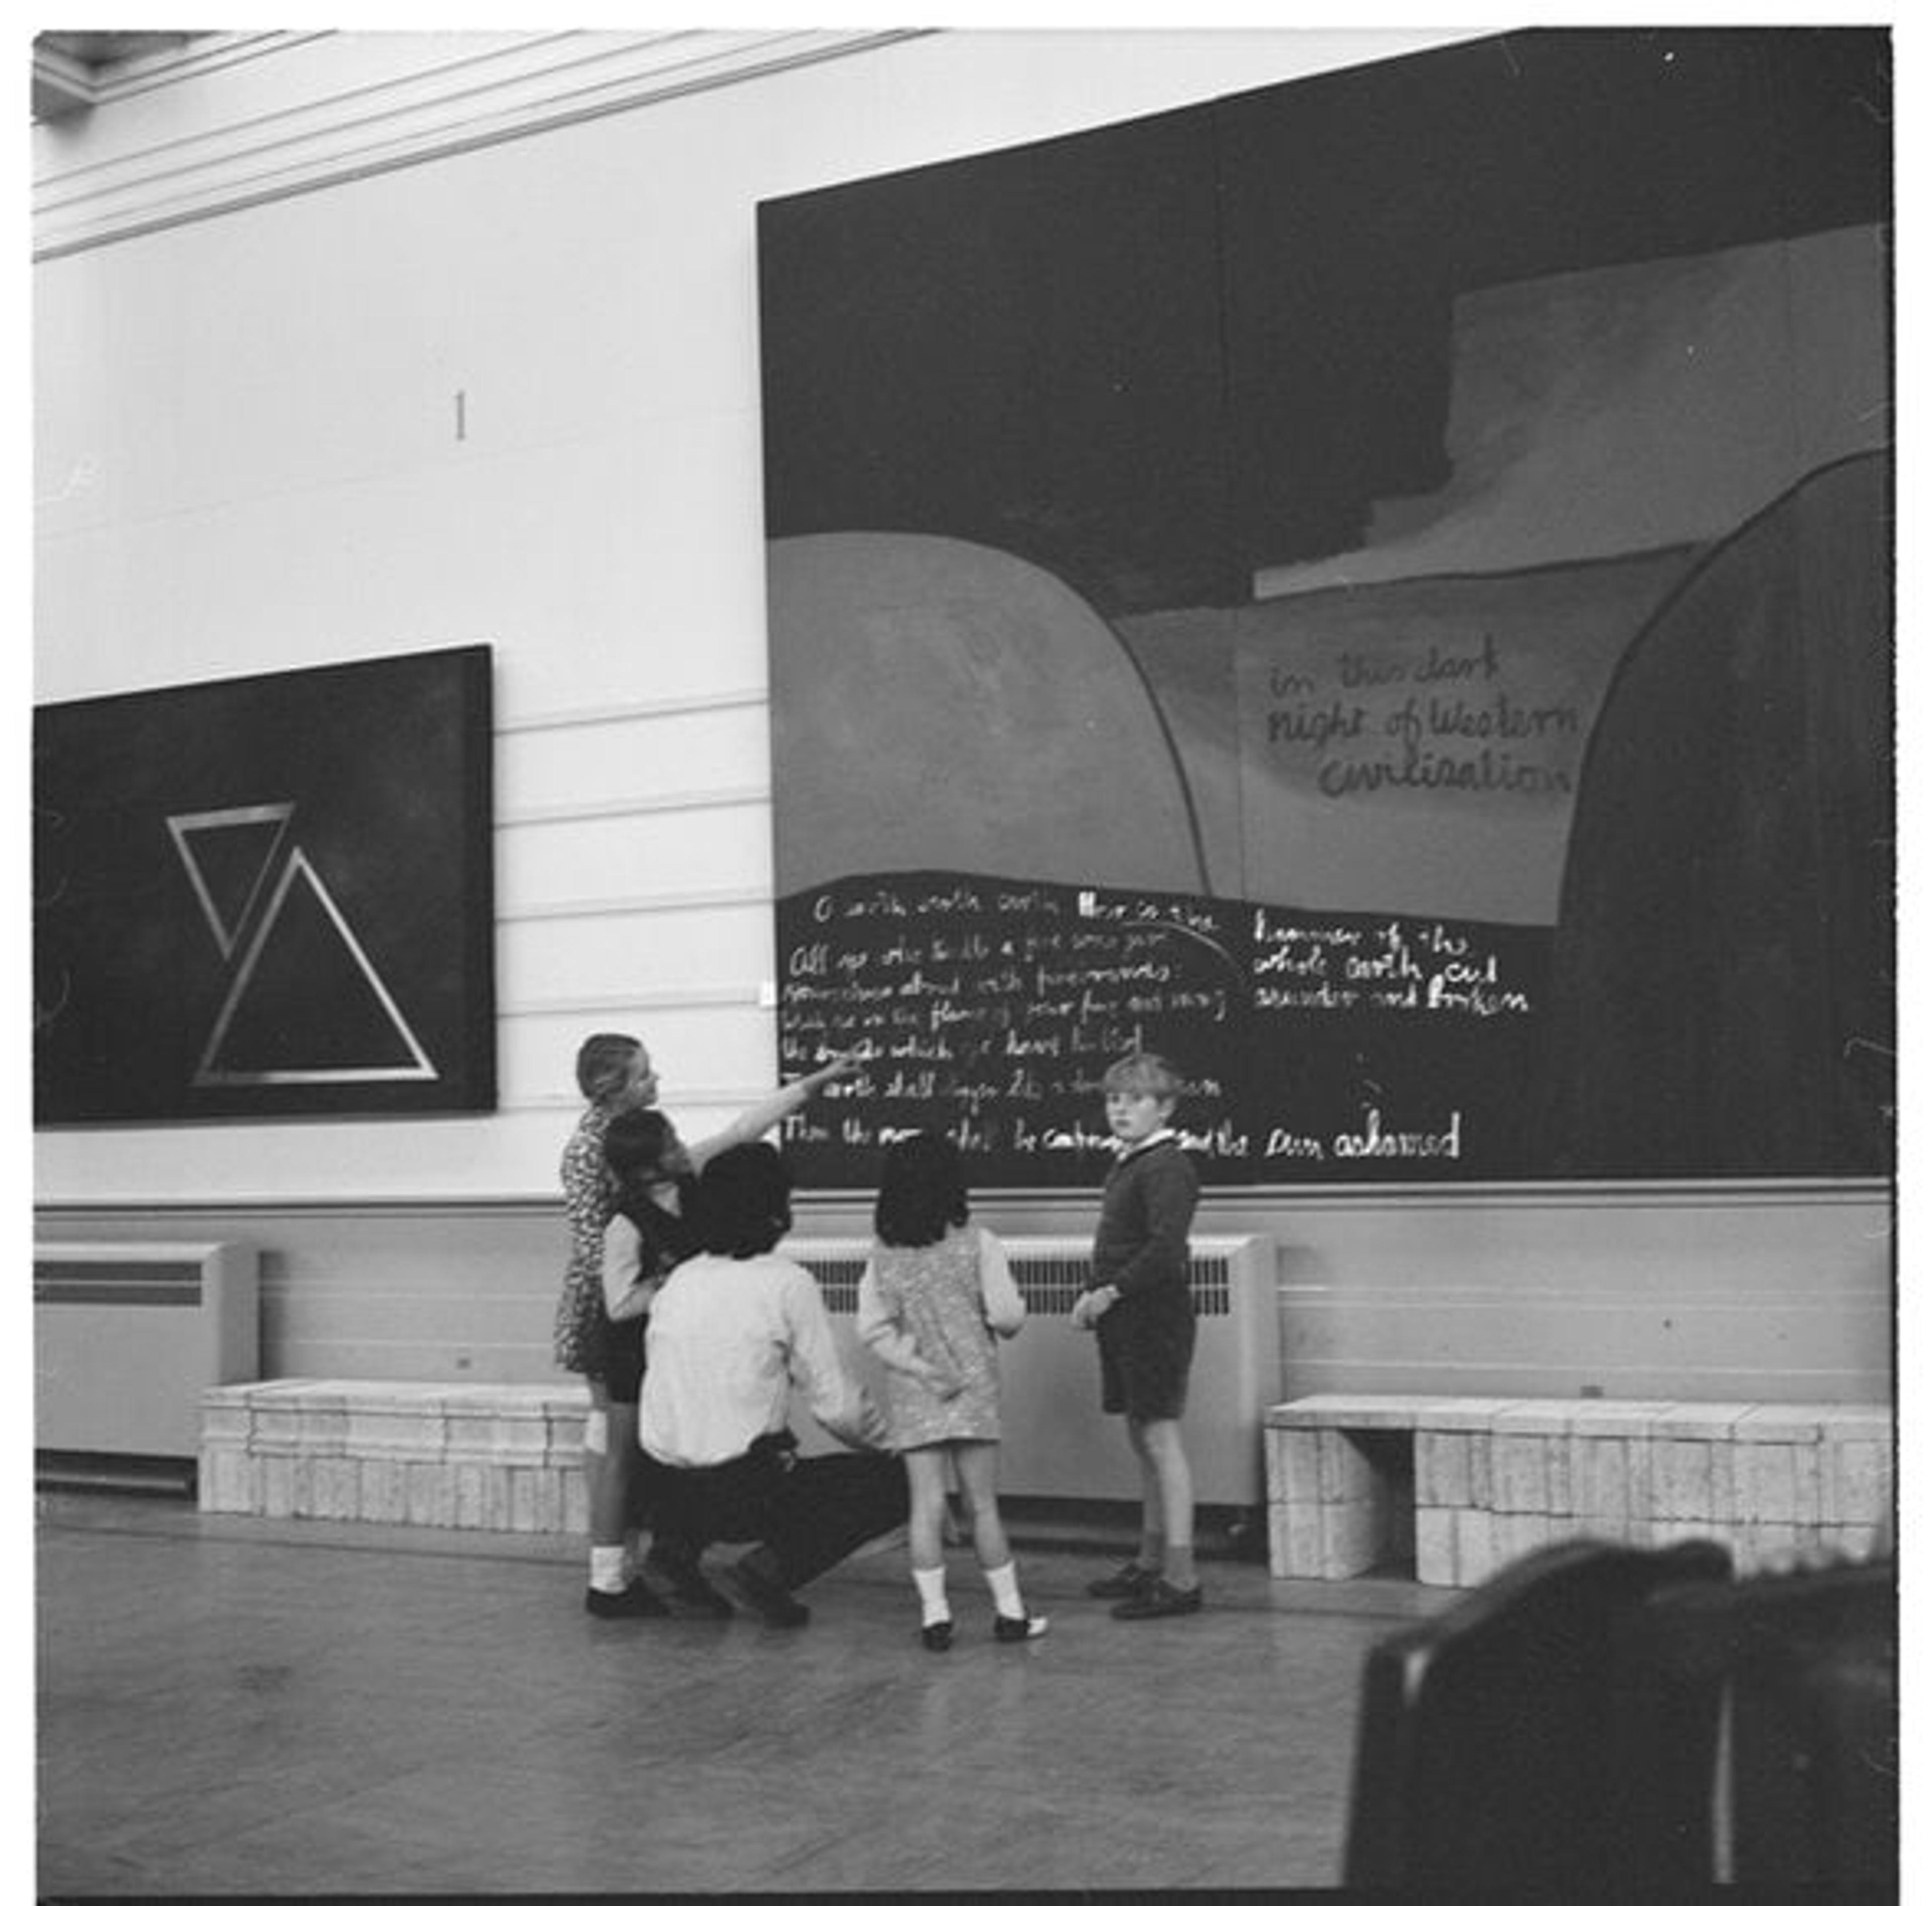 Ans Westra children looking at Colin McCahon's Gate III 1970s